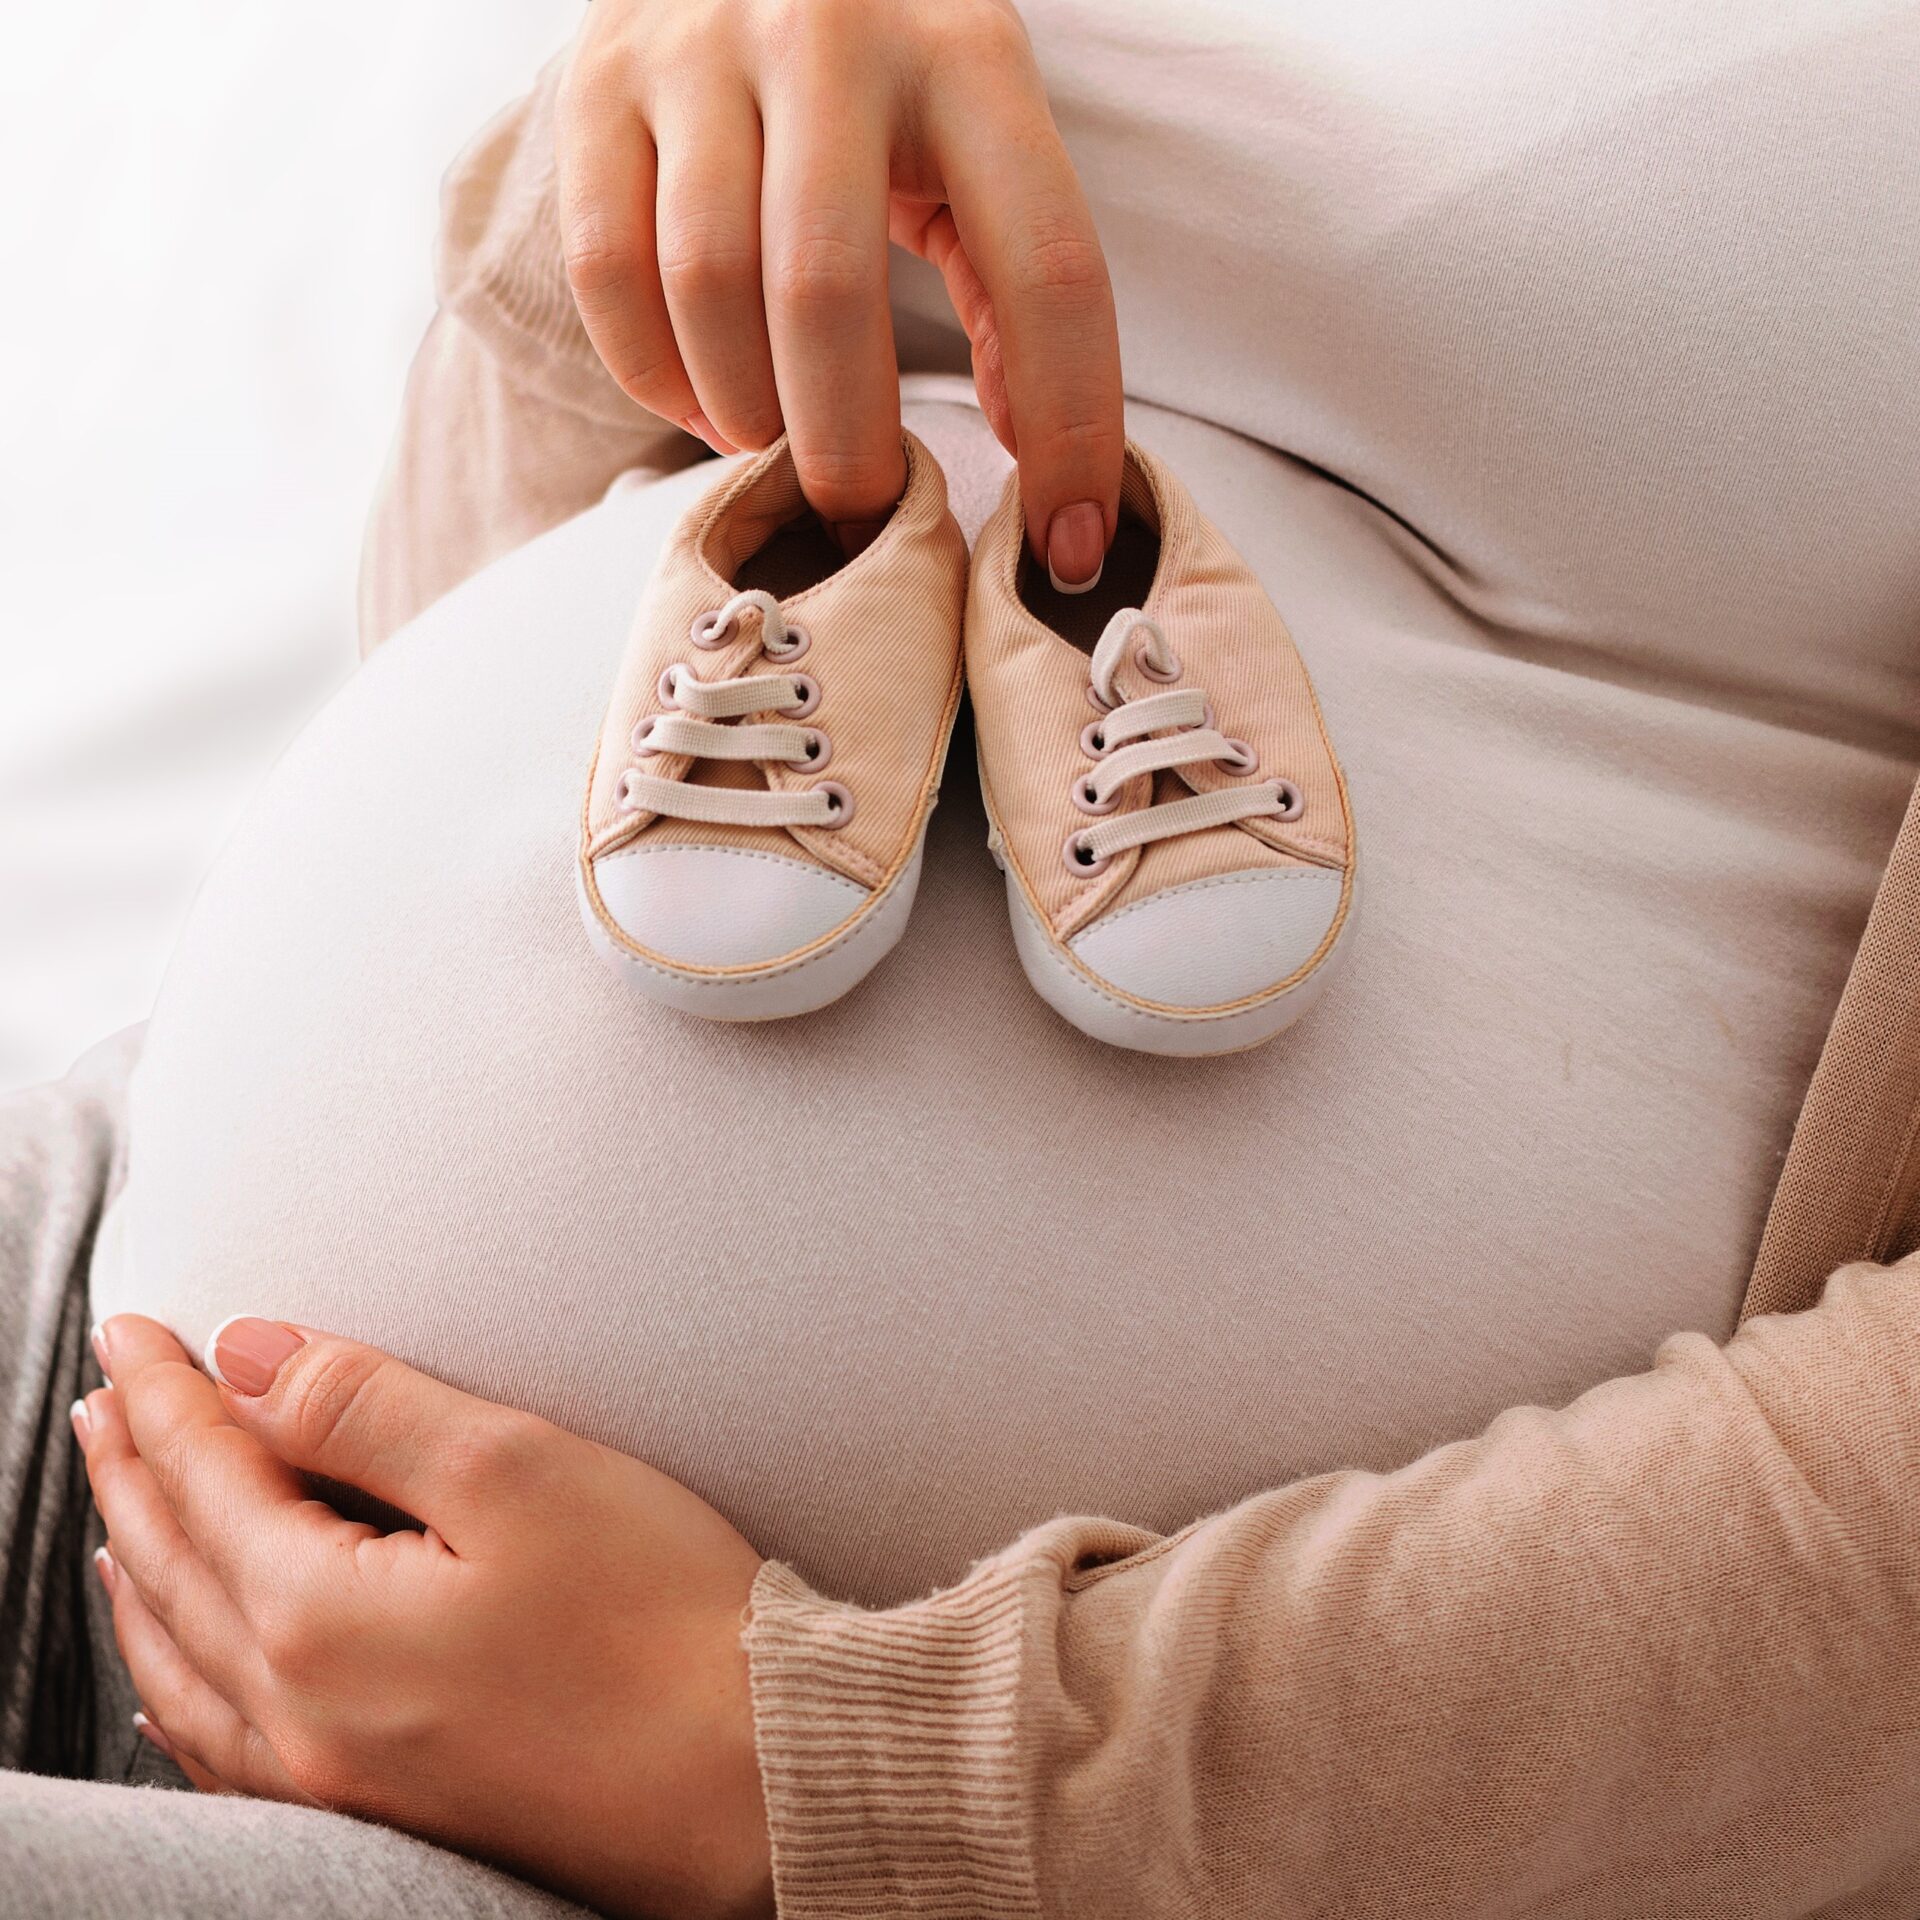 Mom holding baby shoes on pregnant tummy